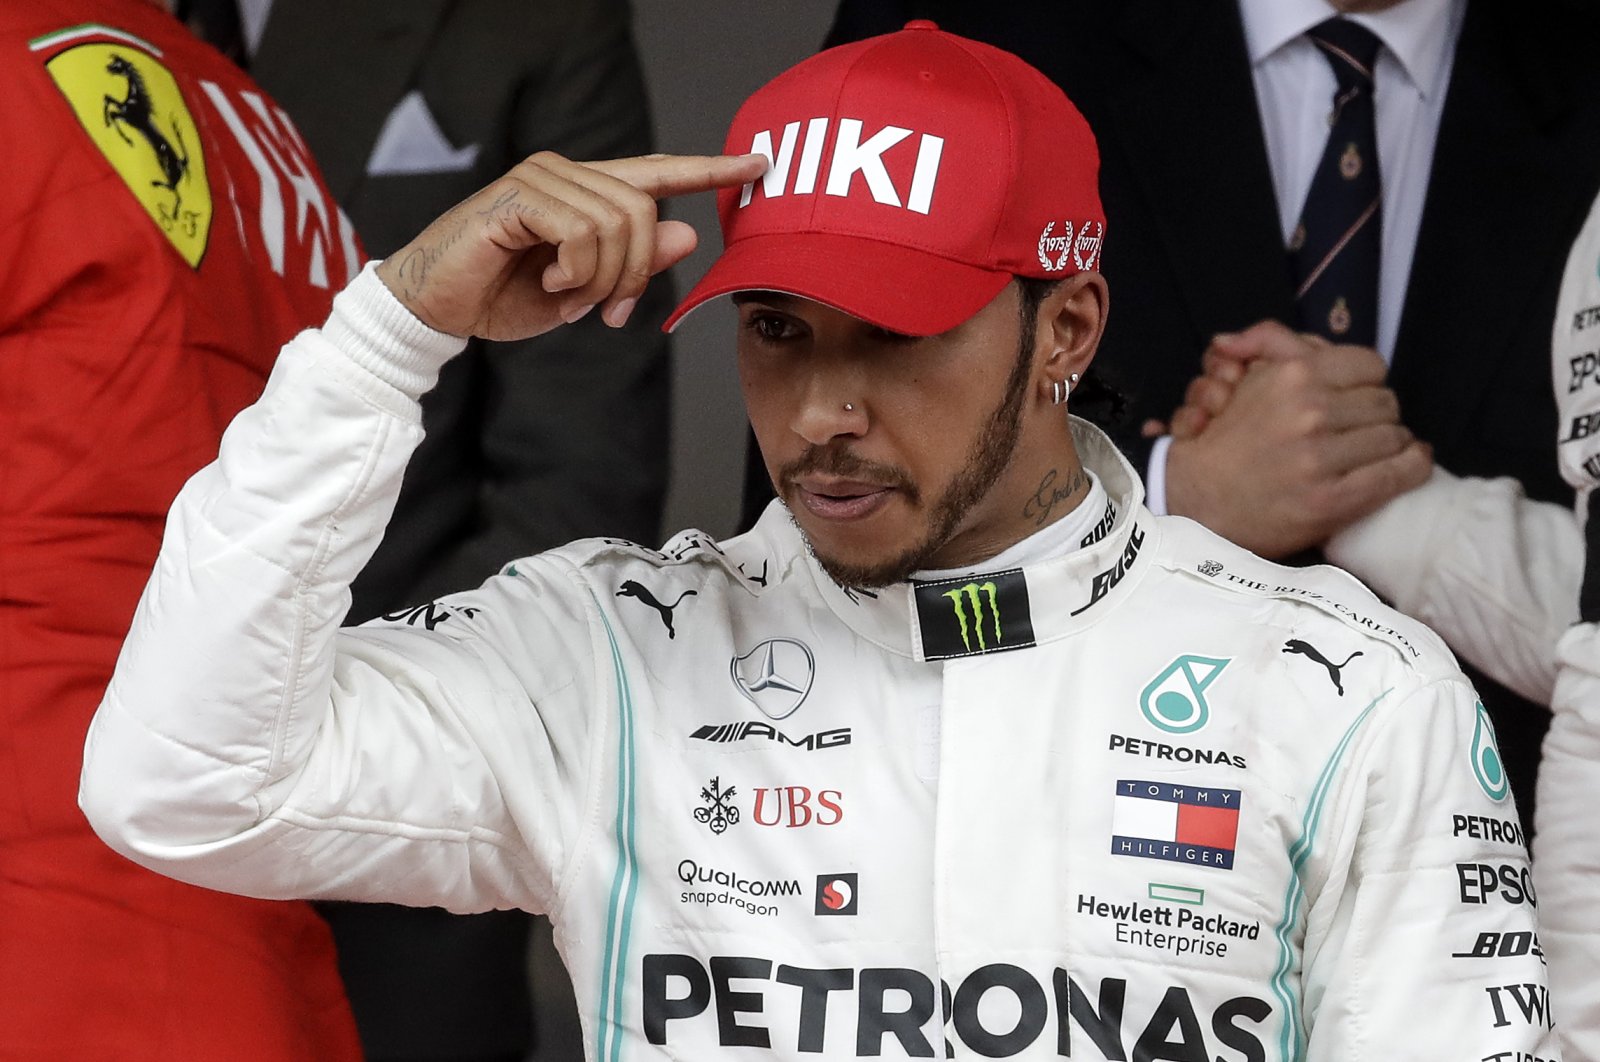 Lewis Hamilton points to his hat in a tribute to Niki Lauda after winning the Monaco Formula One Grand Prix race, in Monaco, May 26, 2019. (AP Photo)